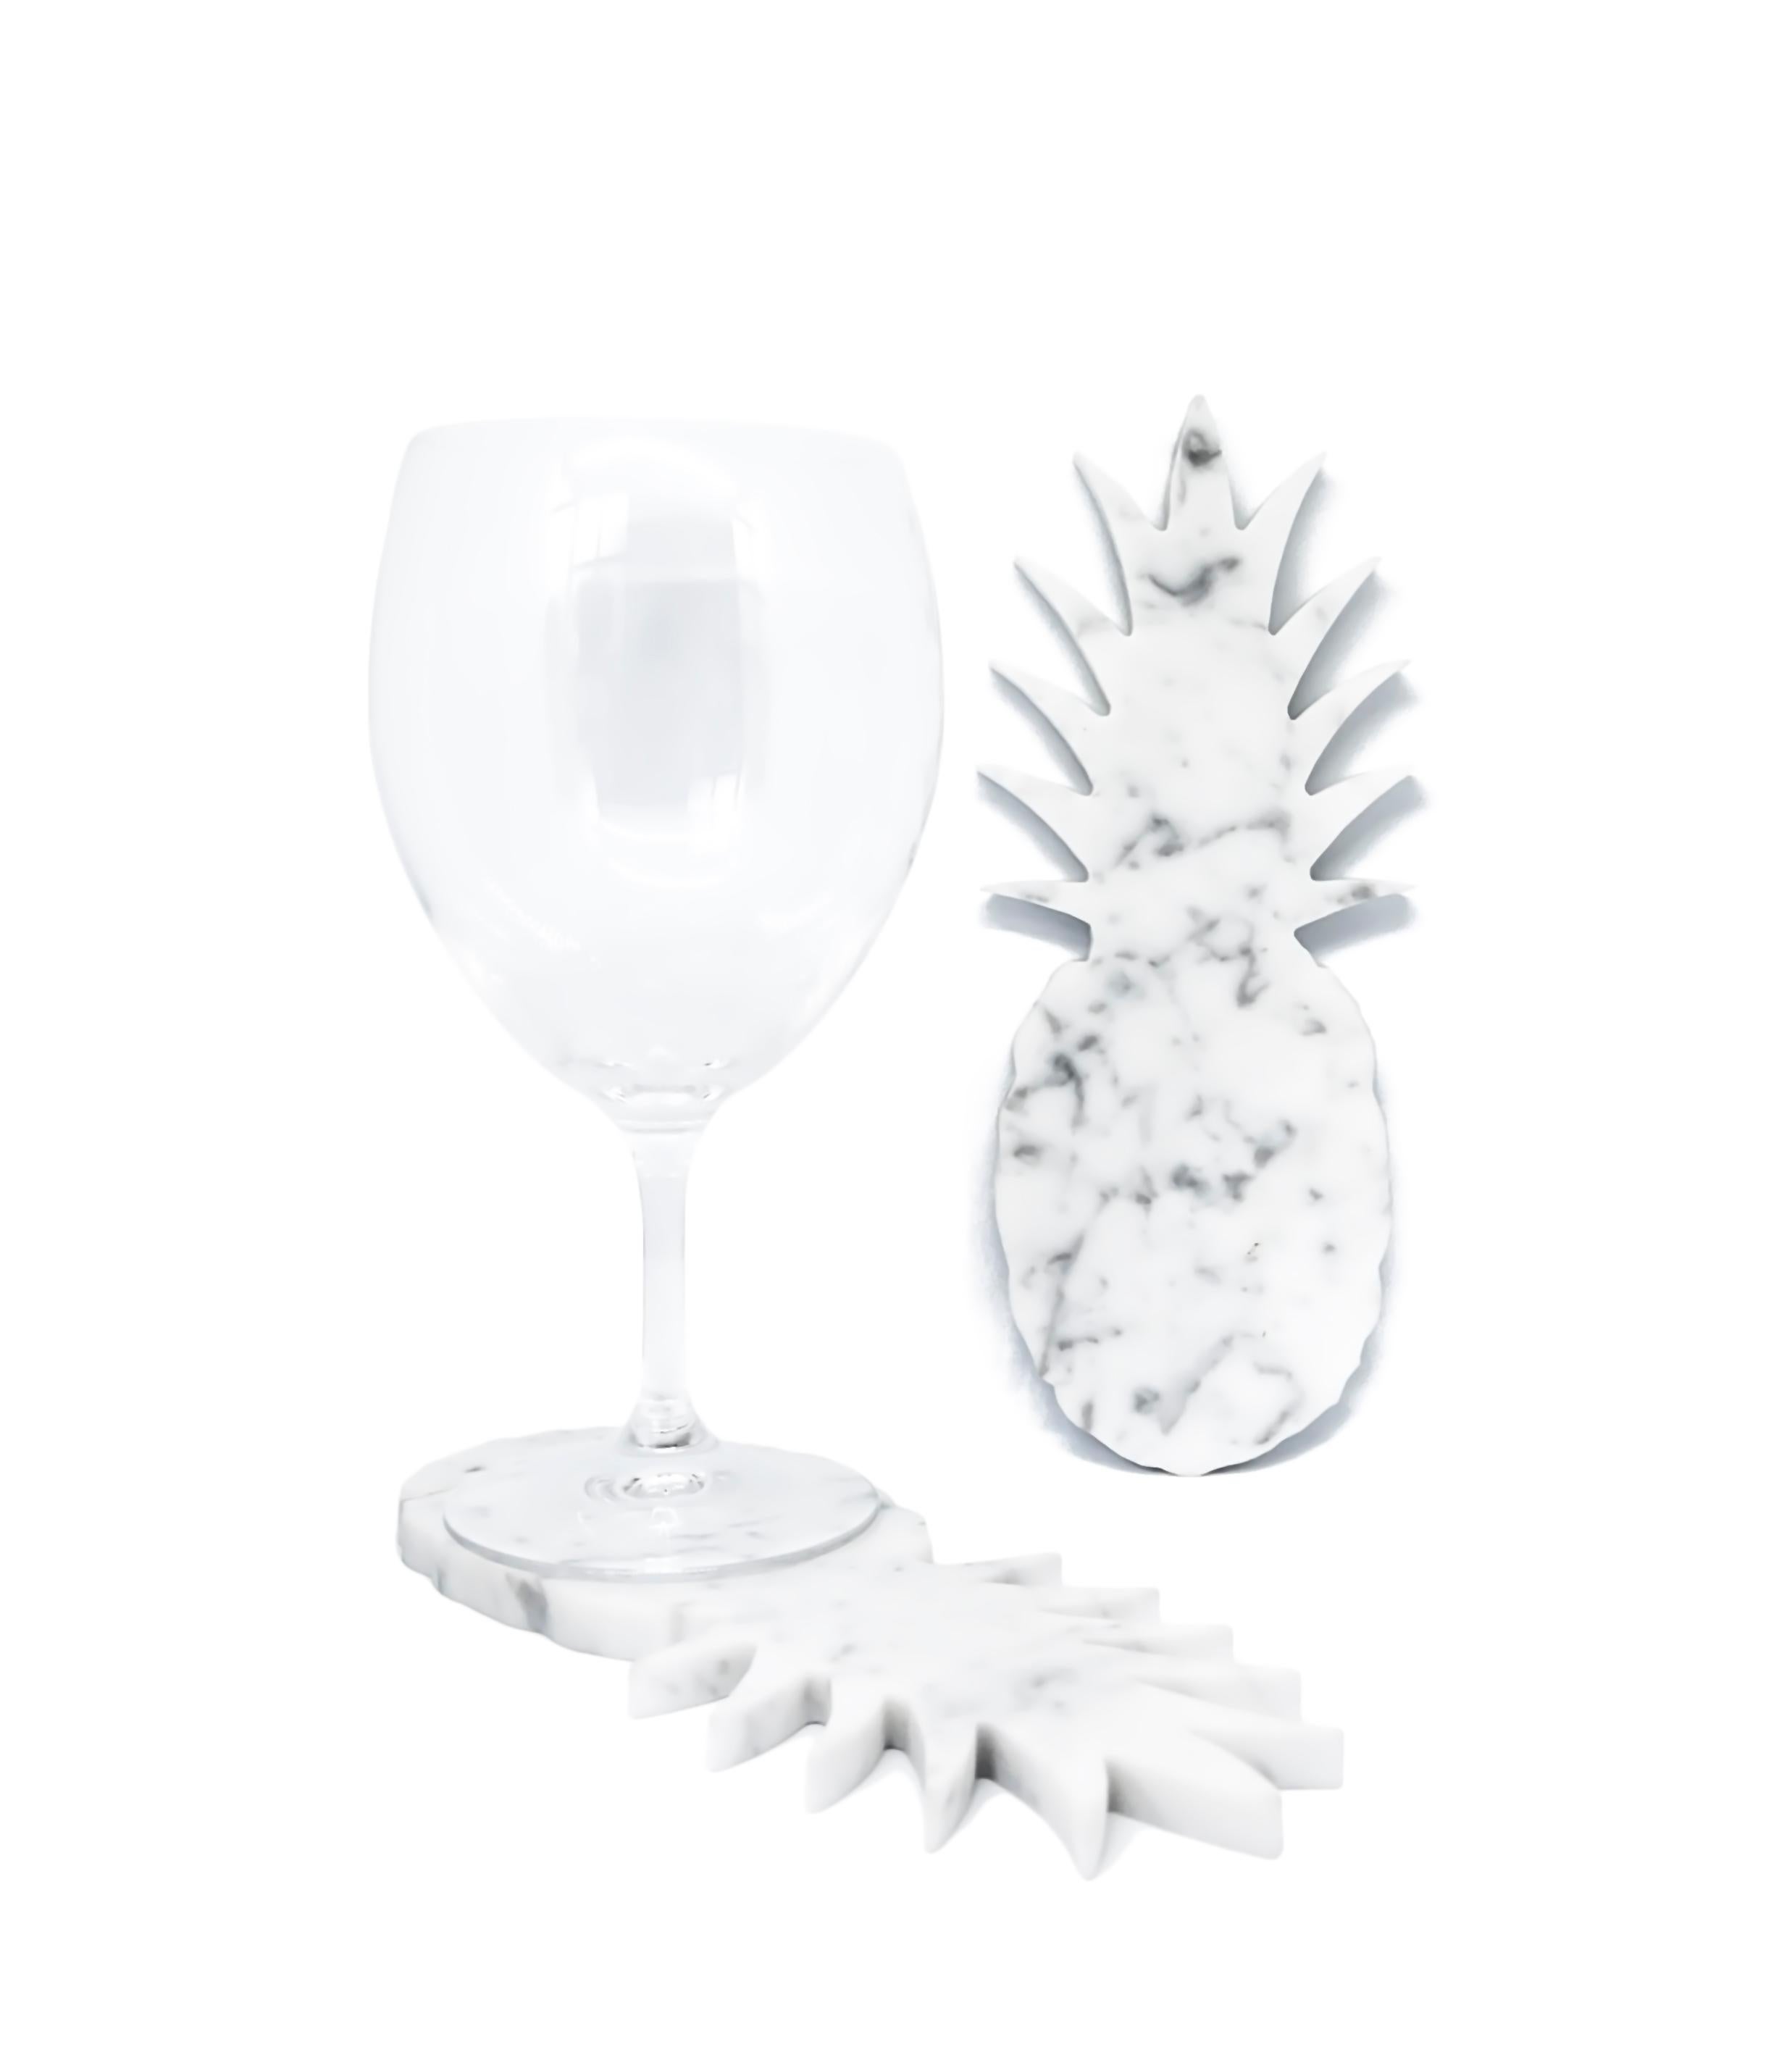 White Carrara marble coaster with pineapple shape. Each piece is in a way unique (every marble block is different in veins and shades) and handmade by Italian artisans specialized over generations in processing marble. Slight variations in shape,